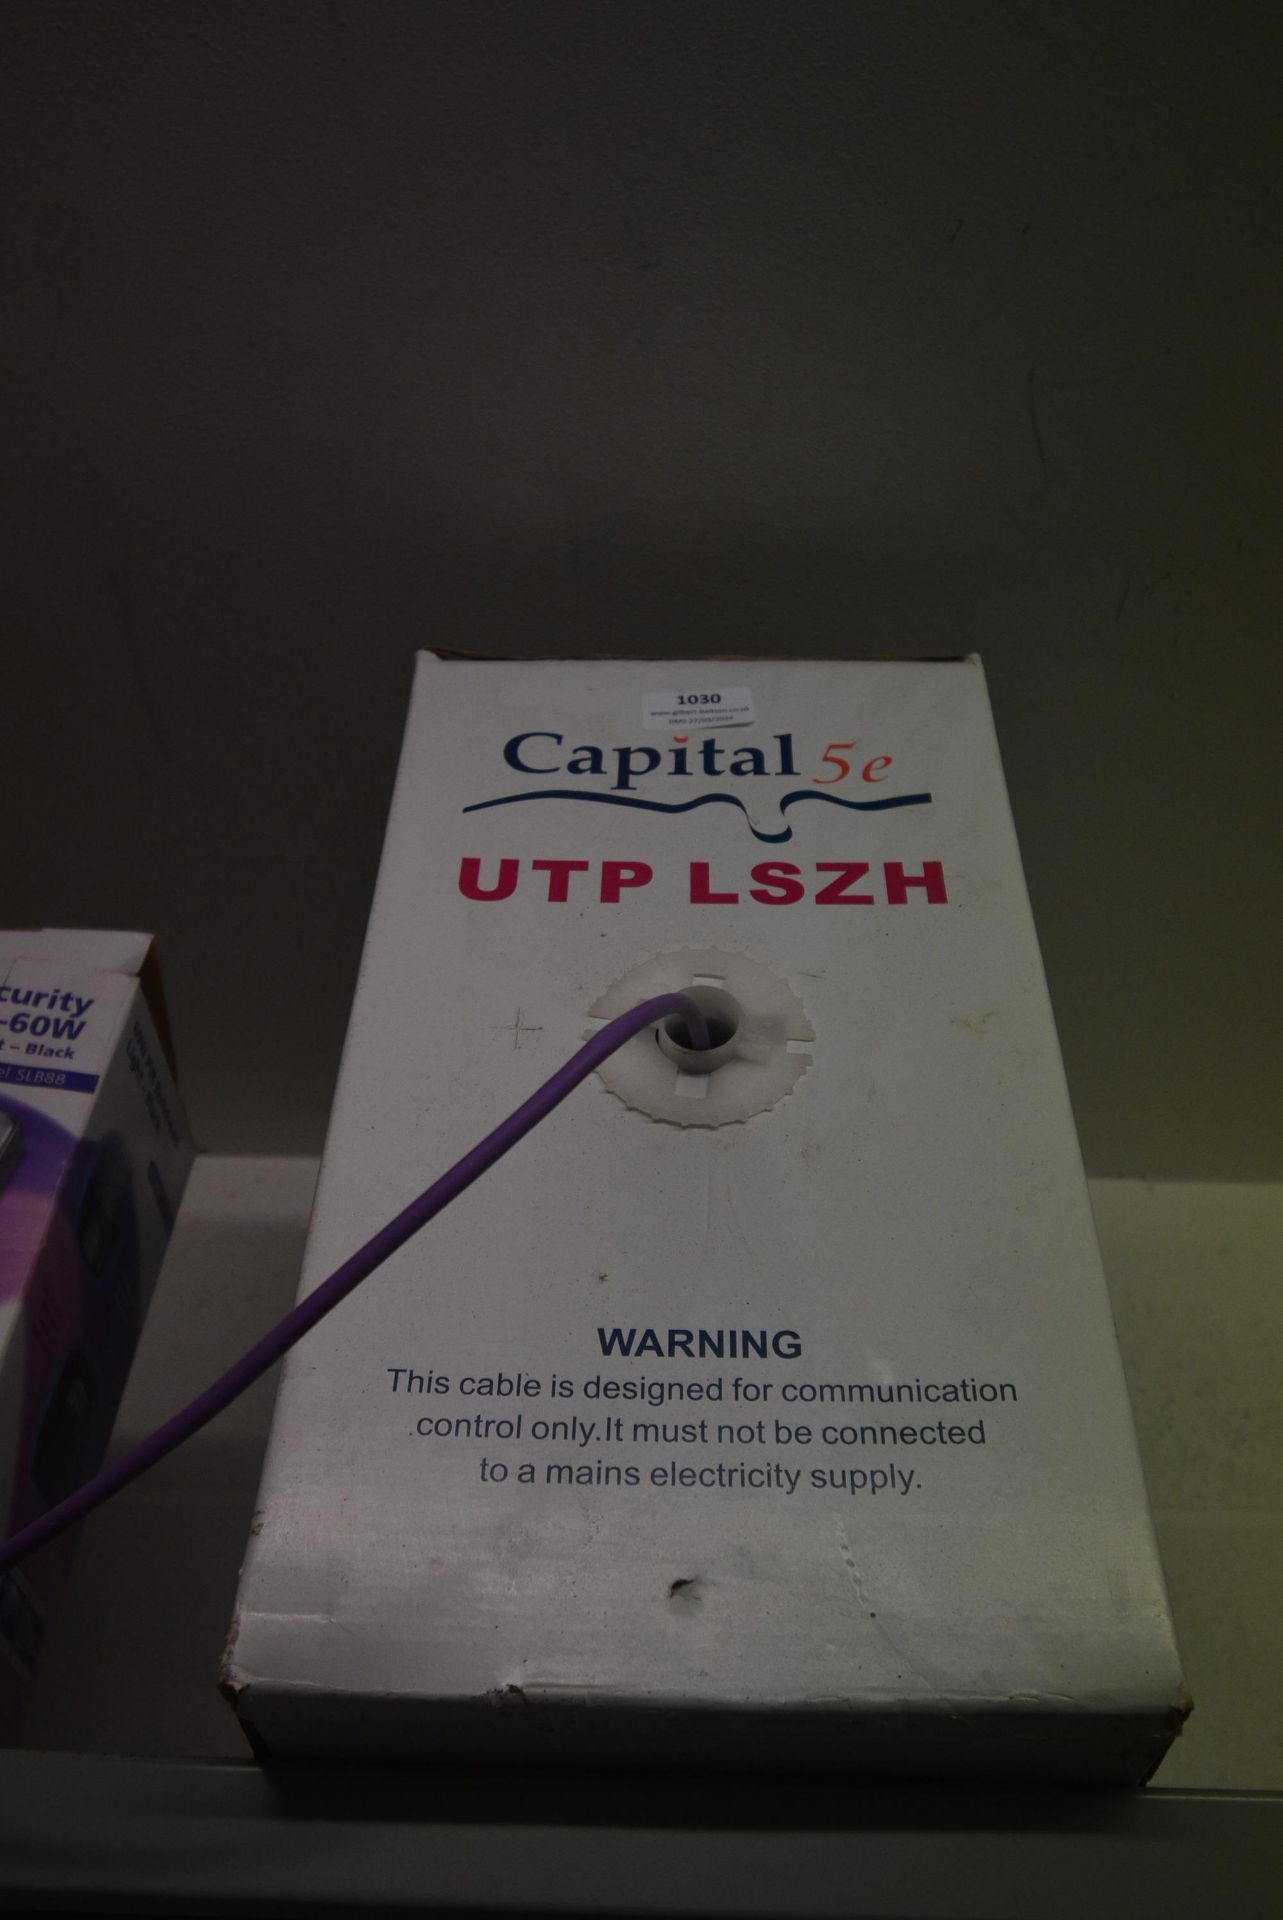 *Part Roll of Capital 5E UTP LSZH5 cable (Location: 64 King Edward St, Grimsby, DN31 3JP, Viewing